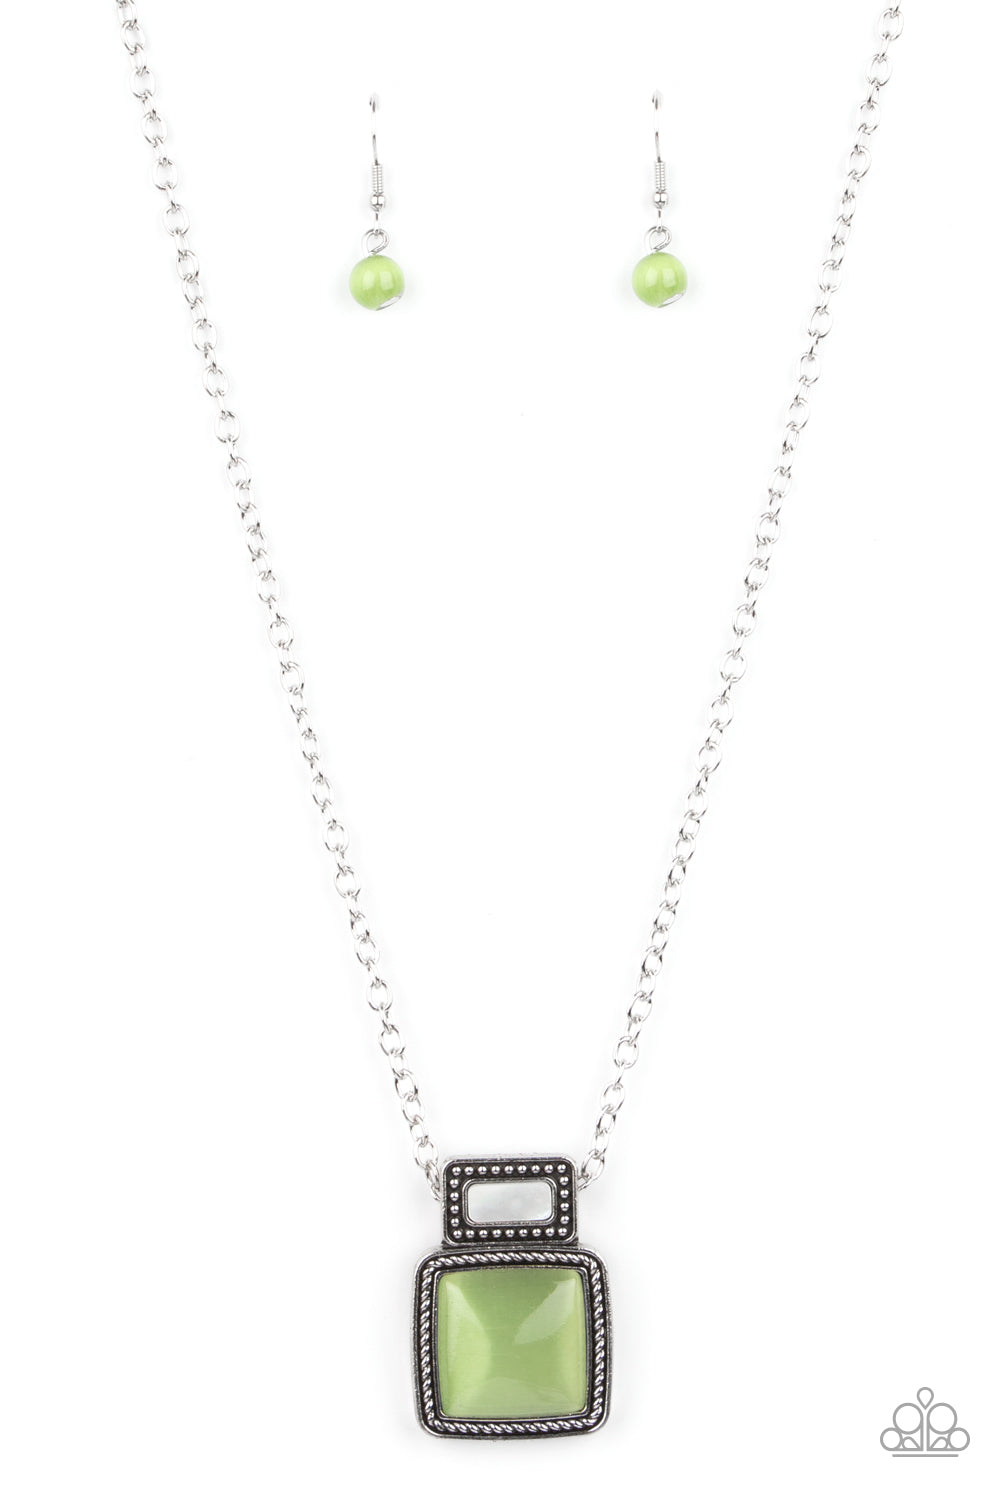 ​Ethereally Elemental - Green Cat's Eye Stone and Silver Necklace - Paparazzi Accessories - 
A shell-like accent is pressed into the center of a studded silver frame that sits atop a silver rope-like frame that is dotted with a square Green Ash cat's eye stone. The colorful pendant swings from a shiny silver chain, creating an ethereal pendant below the collar. Features an adjustable clasp closure.
